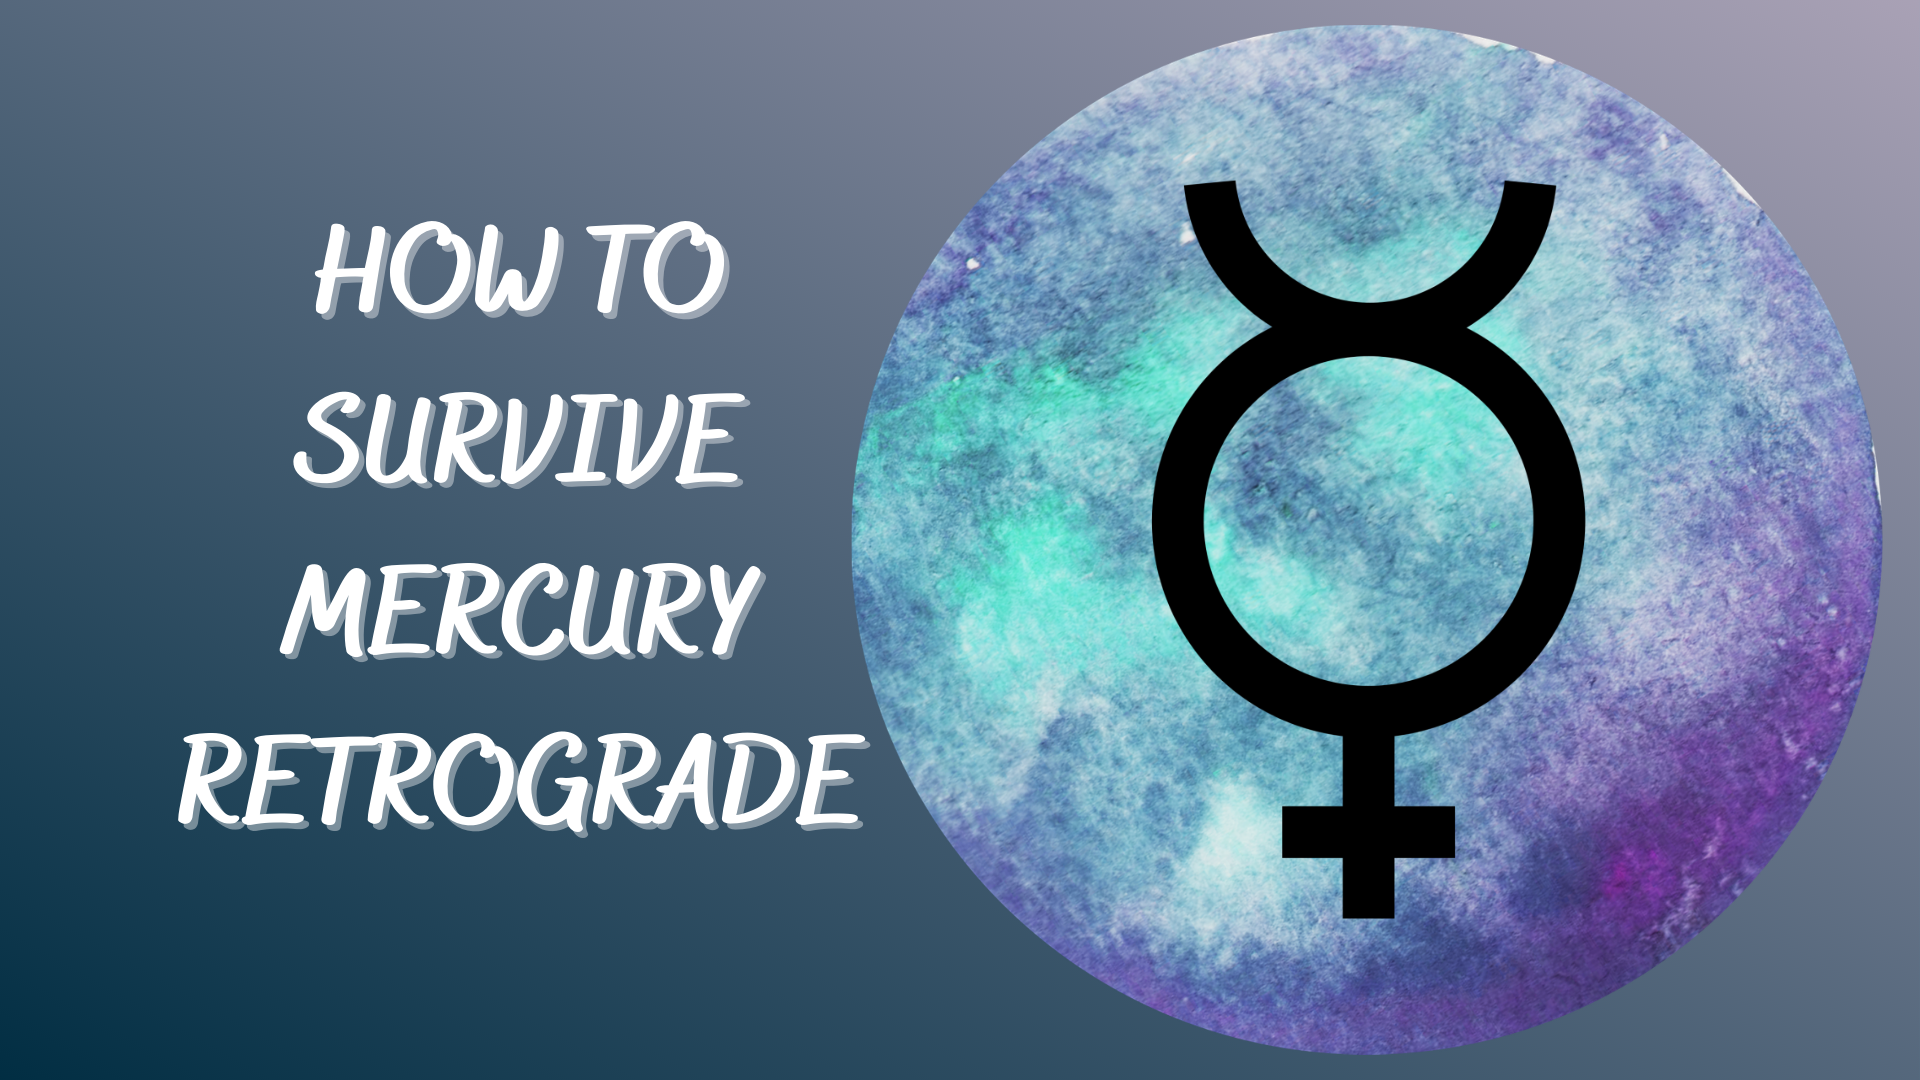 Can Mercury Retrograde Mess With Your Life?